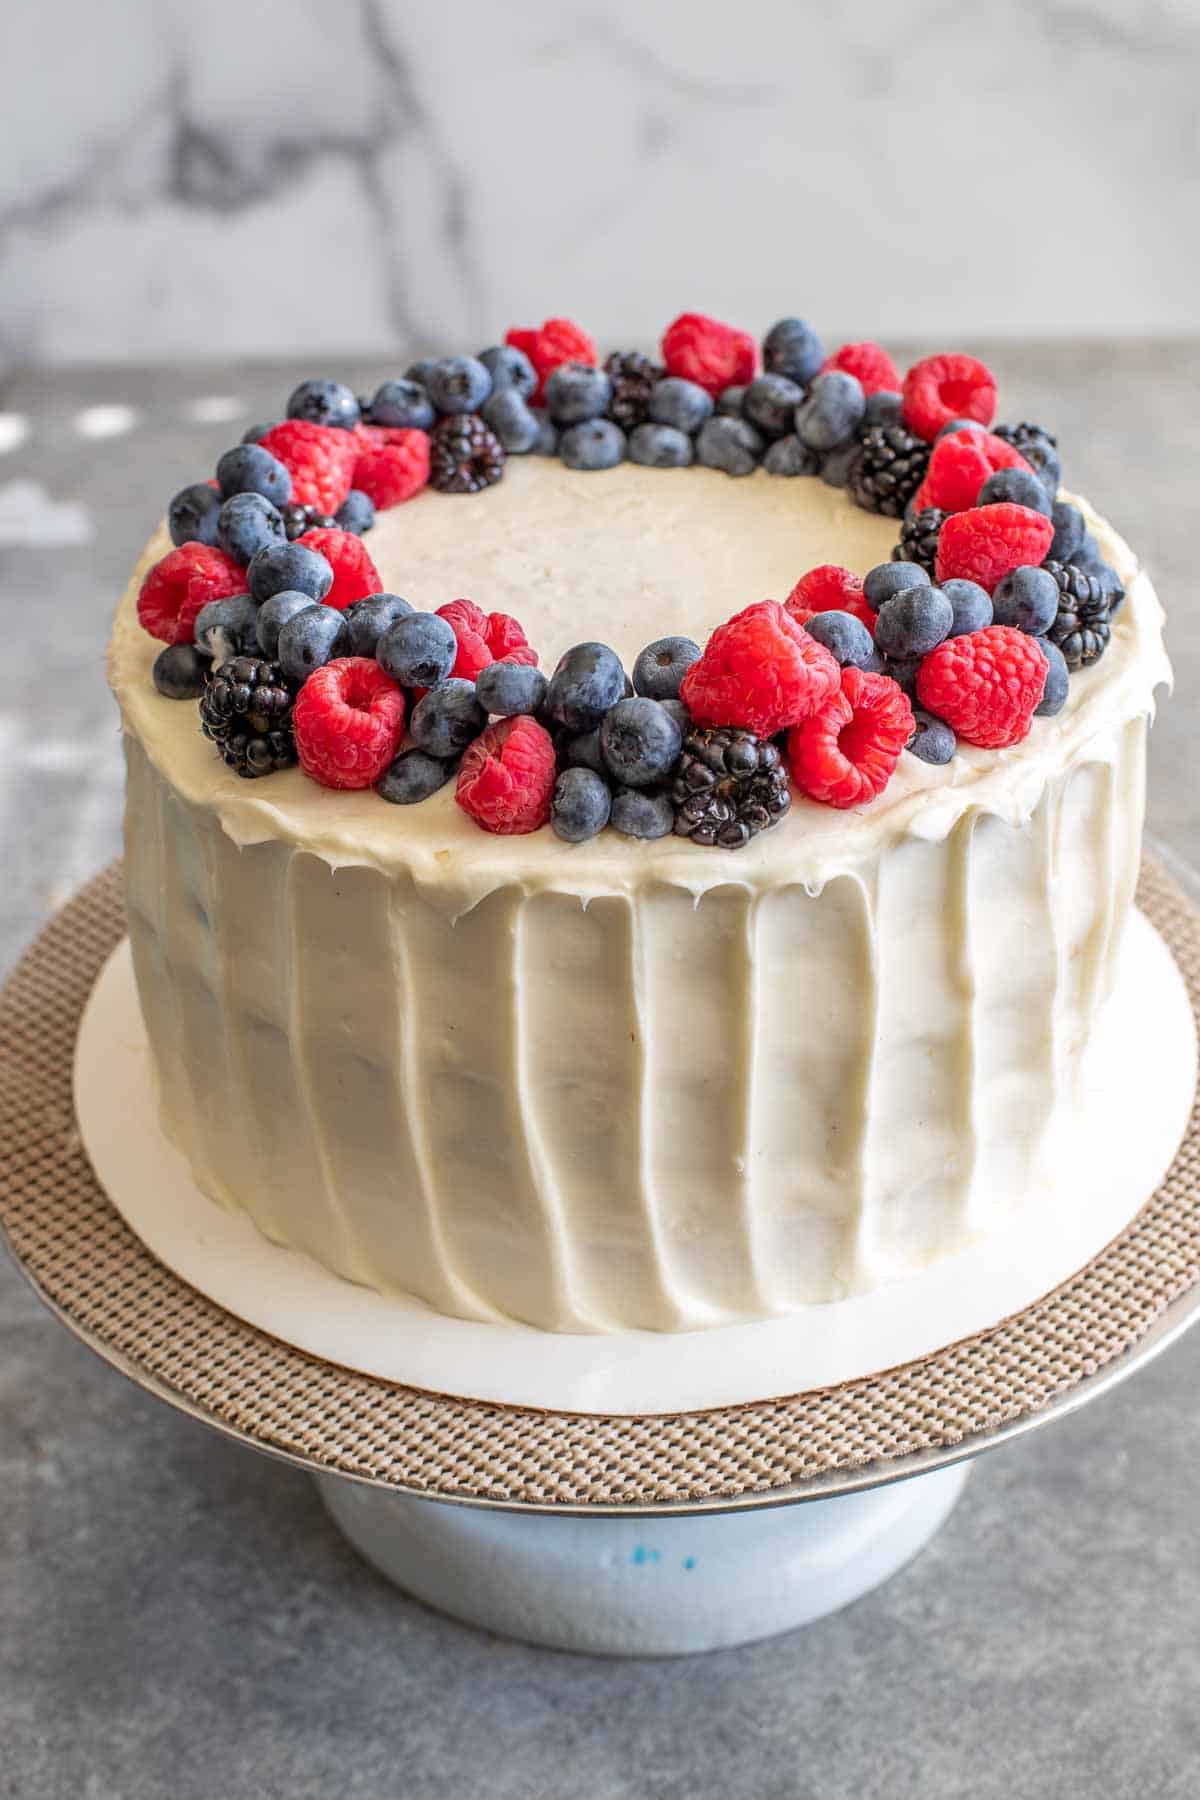 Chantilly Cake with Berries arranged around the top perimeter, in a wreath shape. 